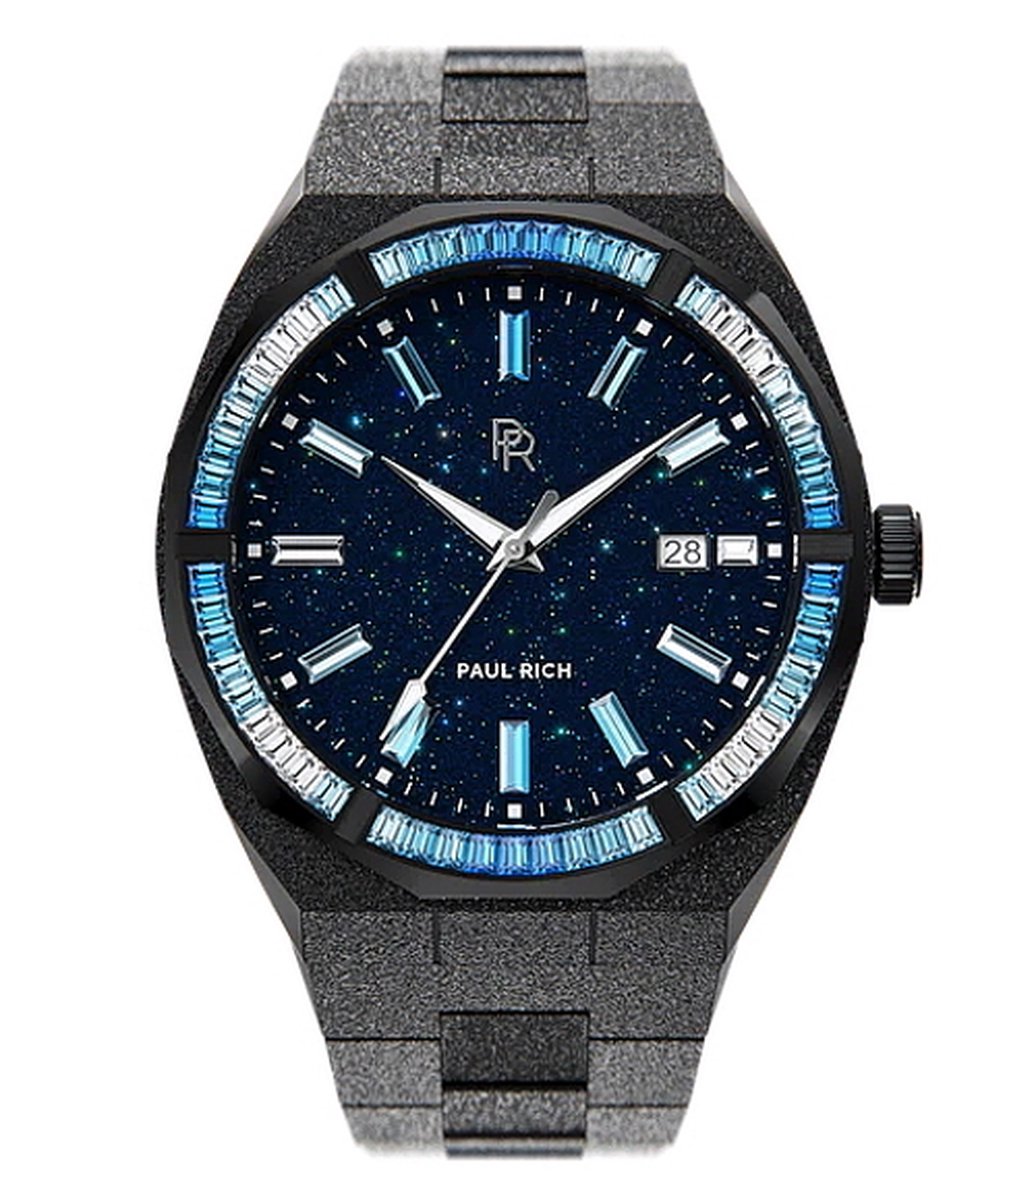 Paul Rich Frosted Star Dust Arctic Crystal Black Limited Edition Automatic